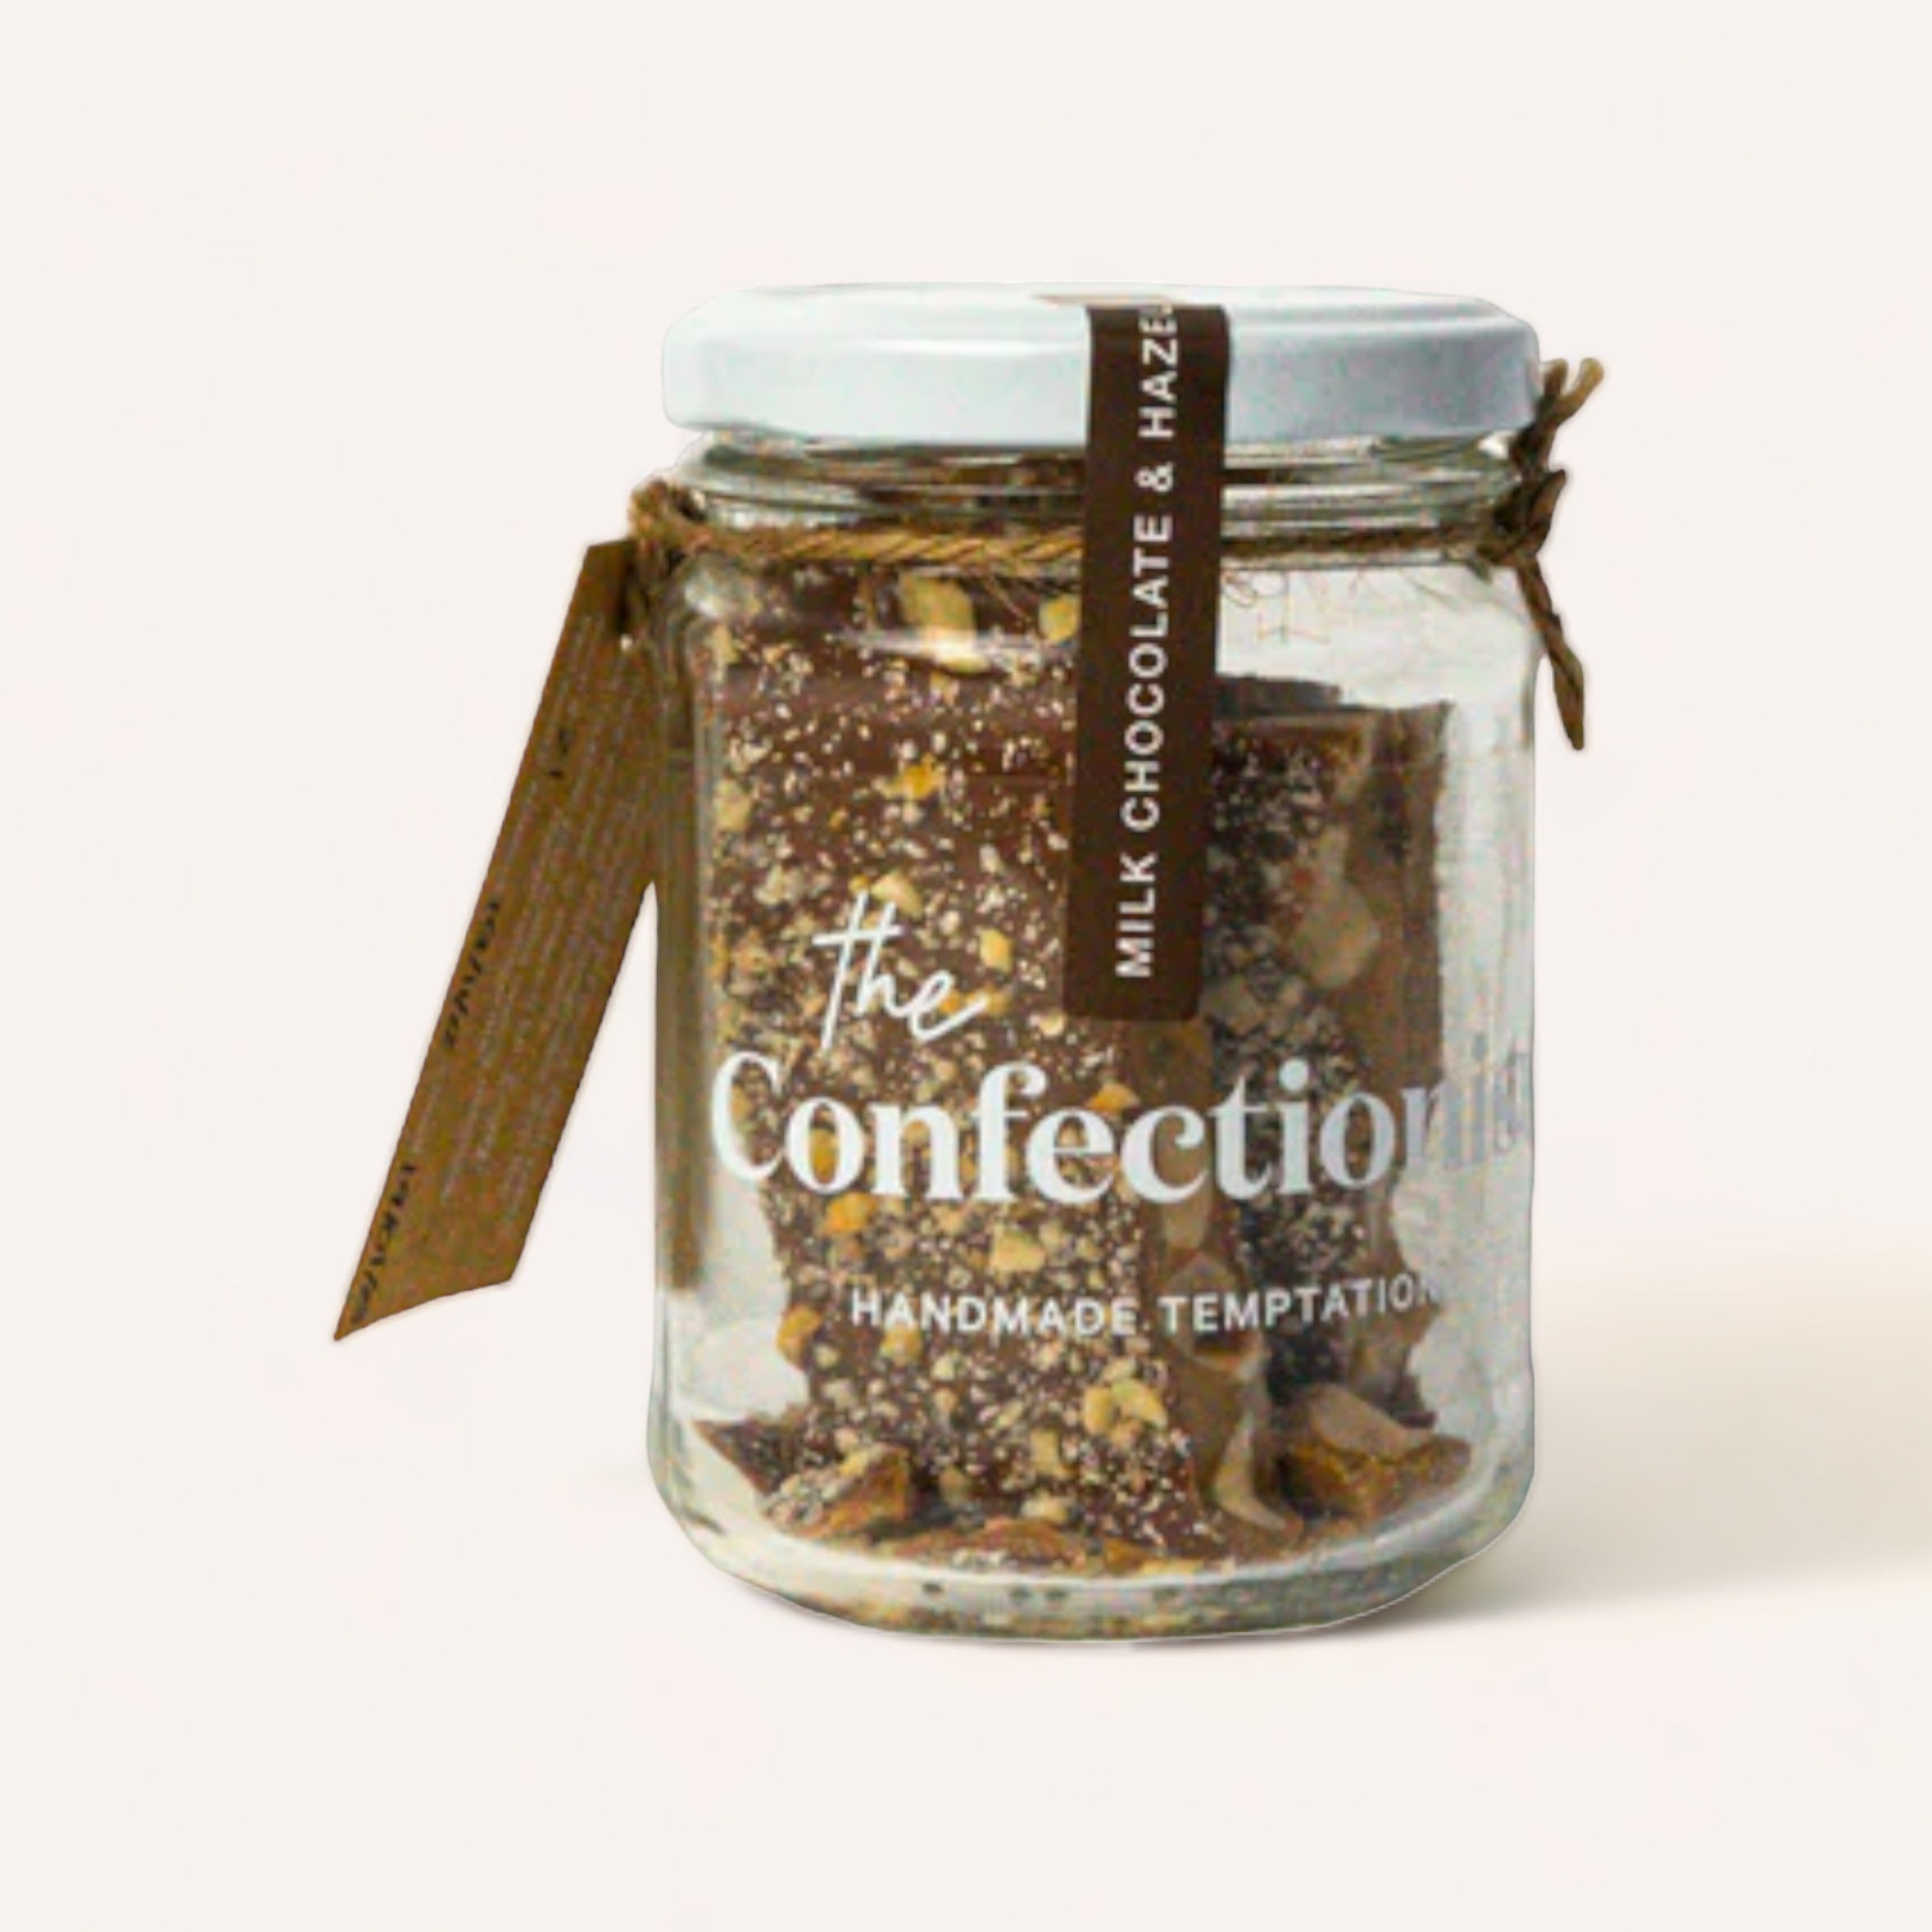 A glass jar filled with layers of Hazelnut Milk Chocolate Toffee by The Confectionist, labeled "the confection," tied with a brown ribbon.